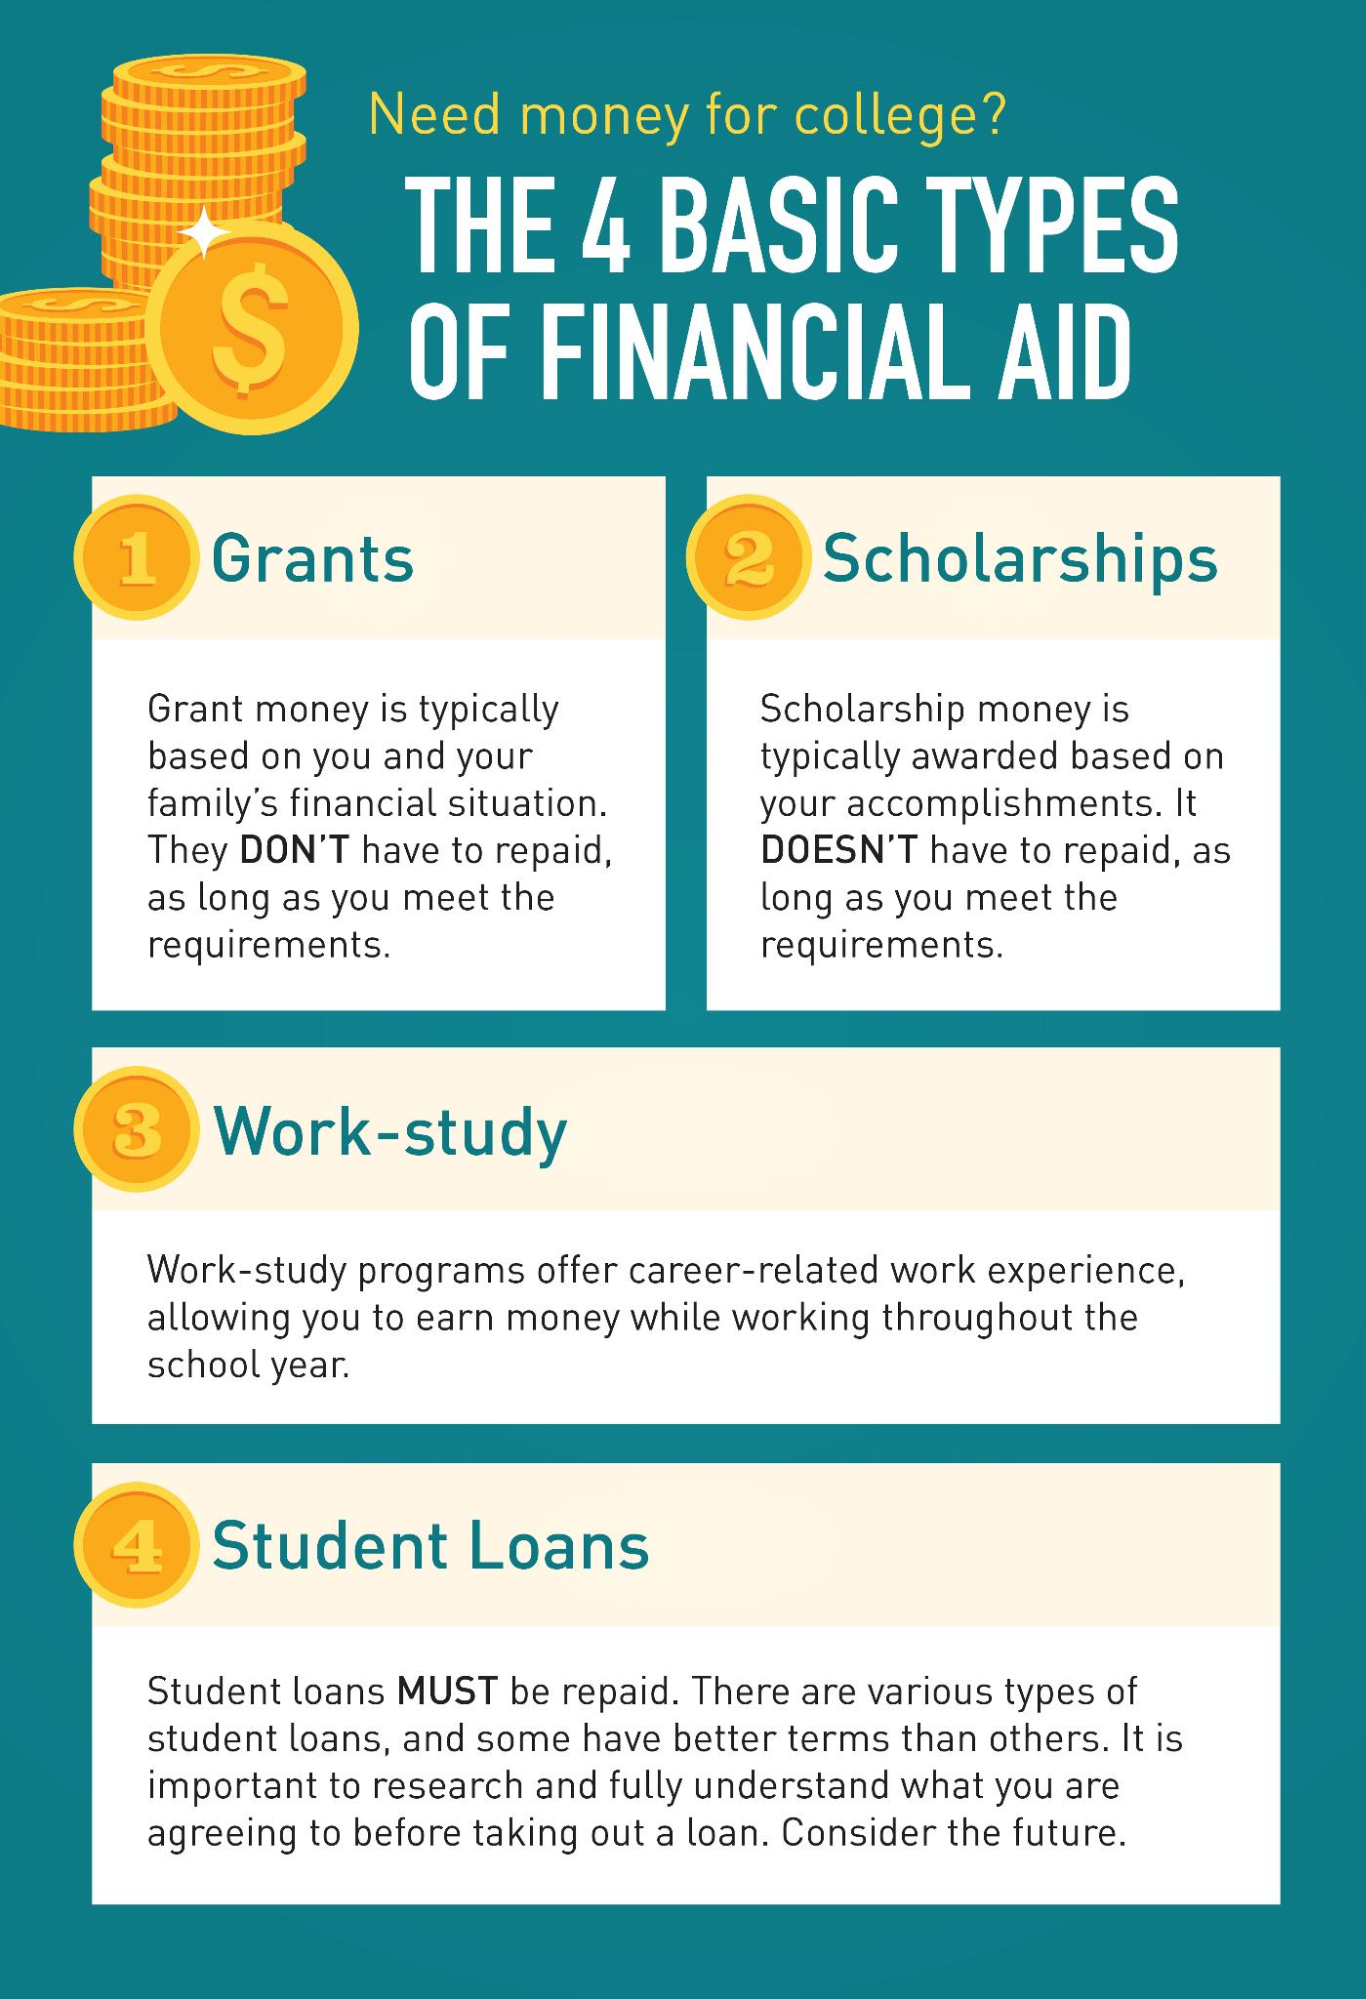 4 basic types of financial aid